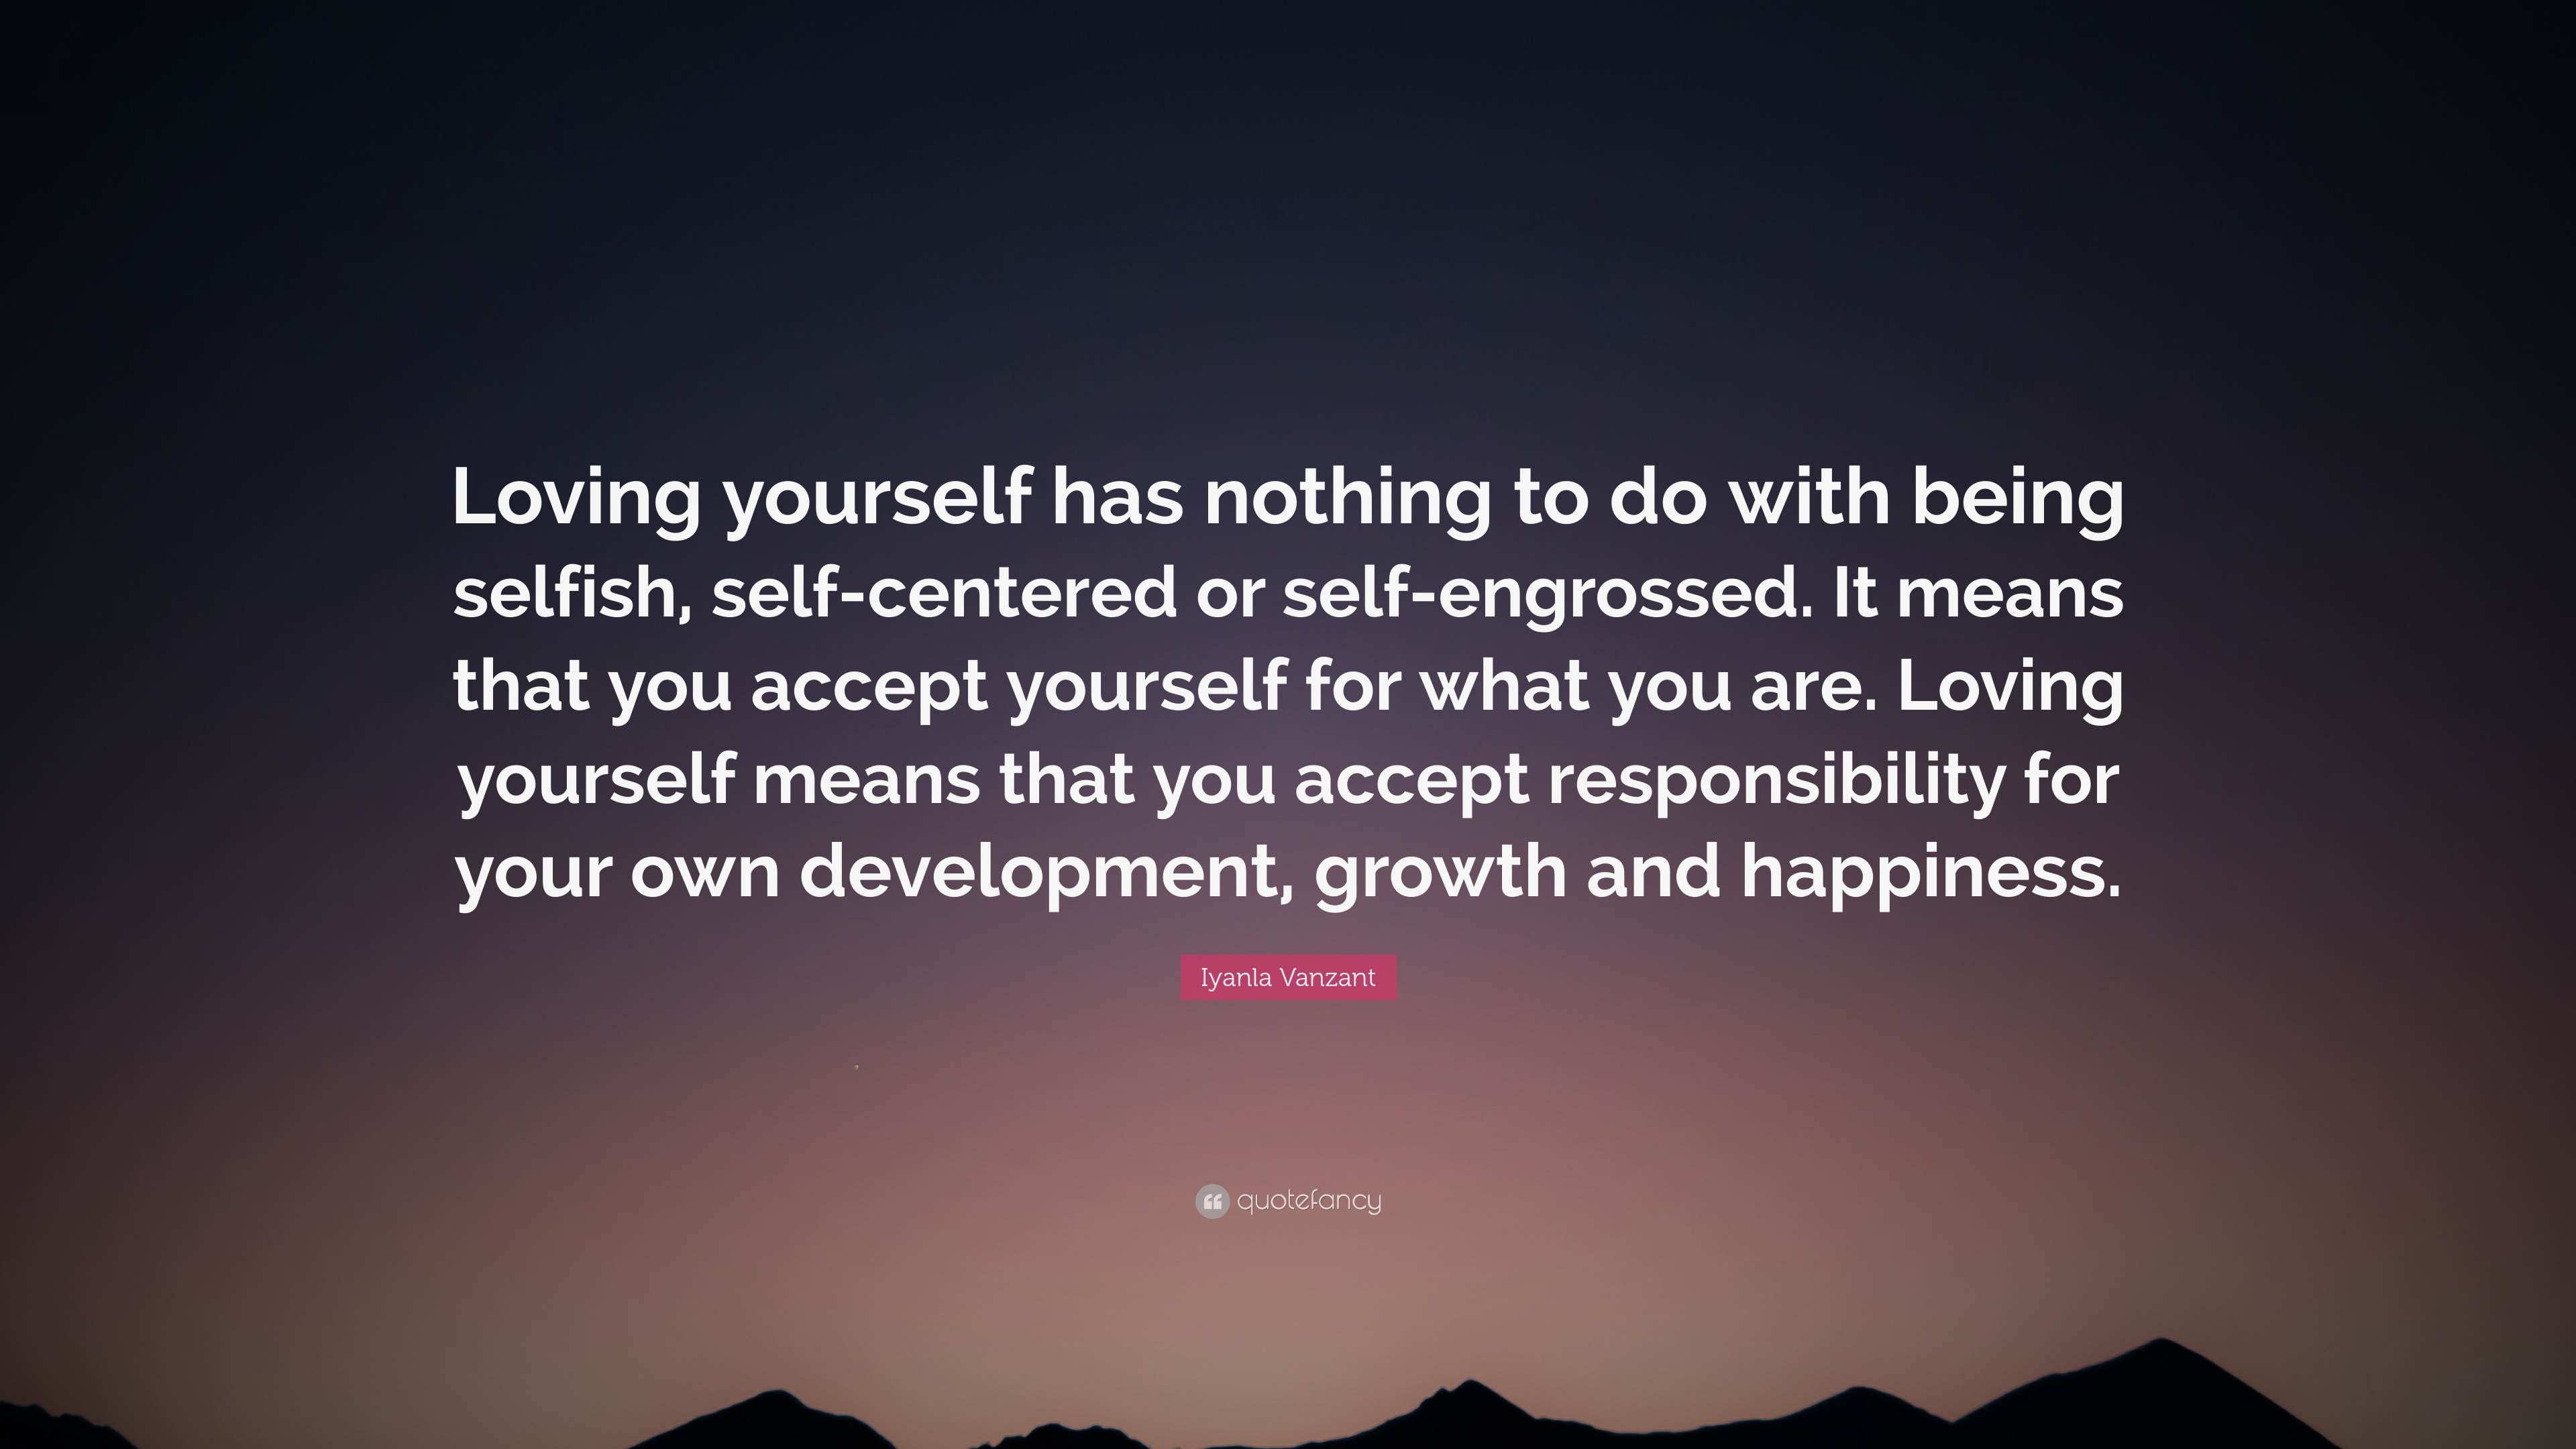 Iyanla Vanzant Quote: “Loving yourself has nothing to do with being ...